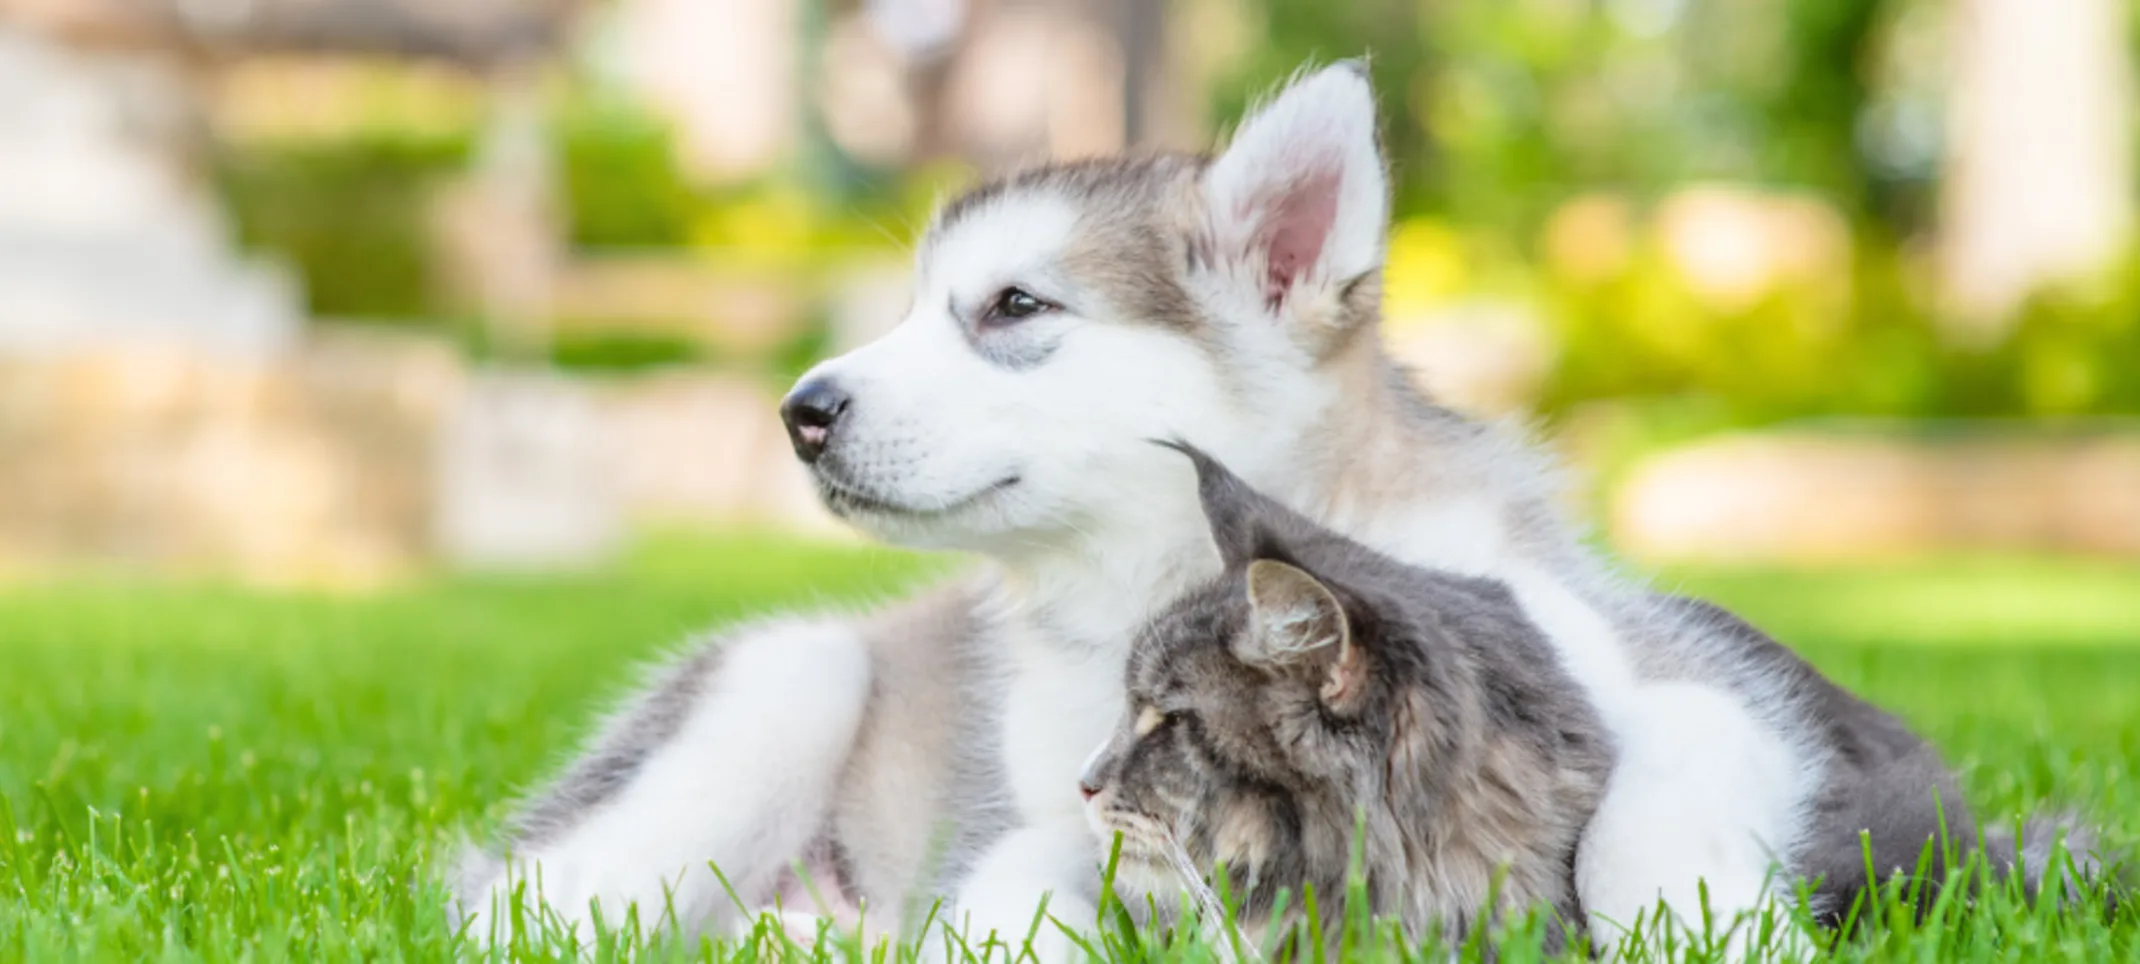 Husky Sitting with Gray Cat Outside on Grass